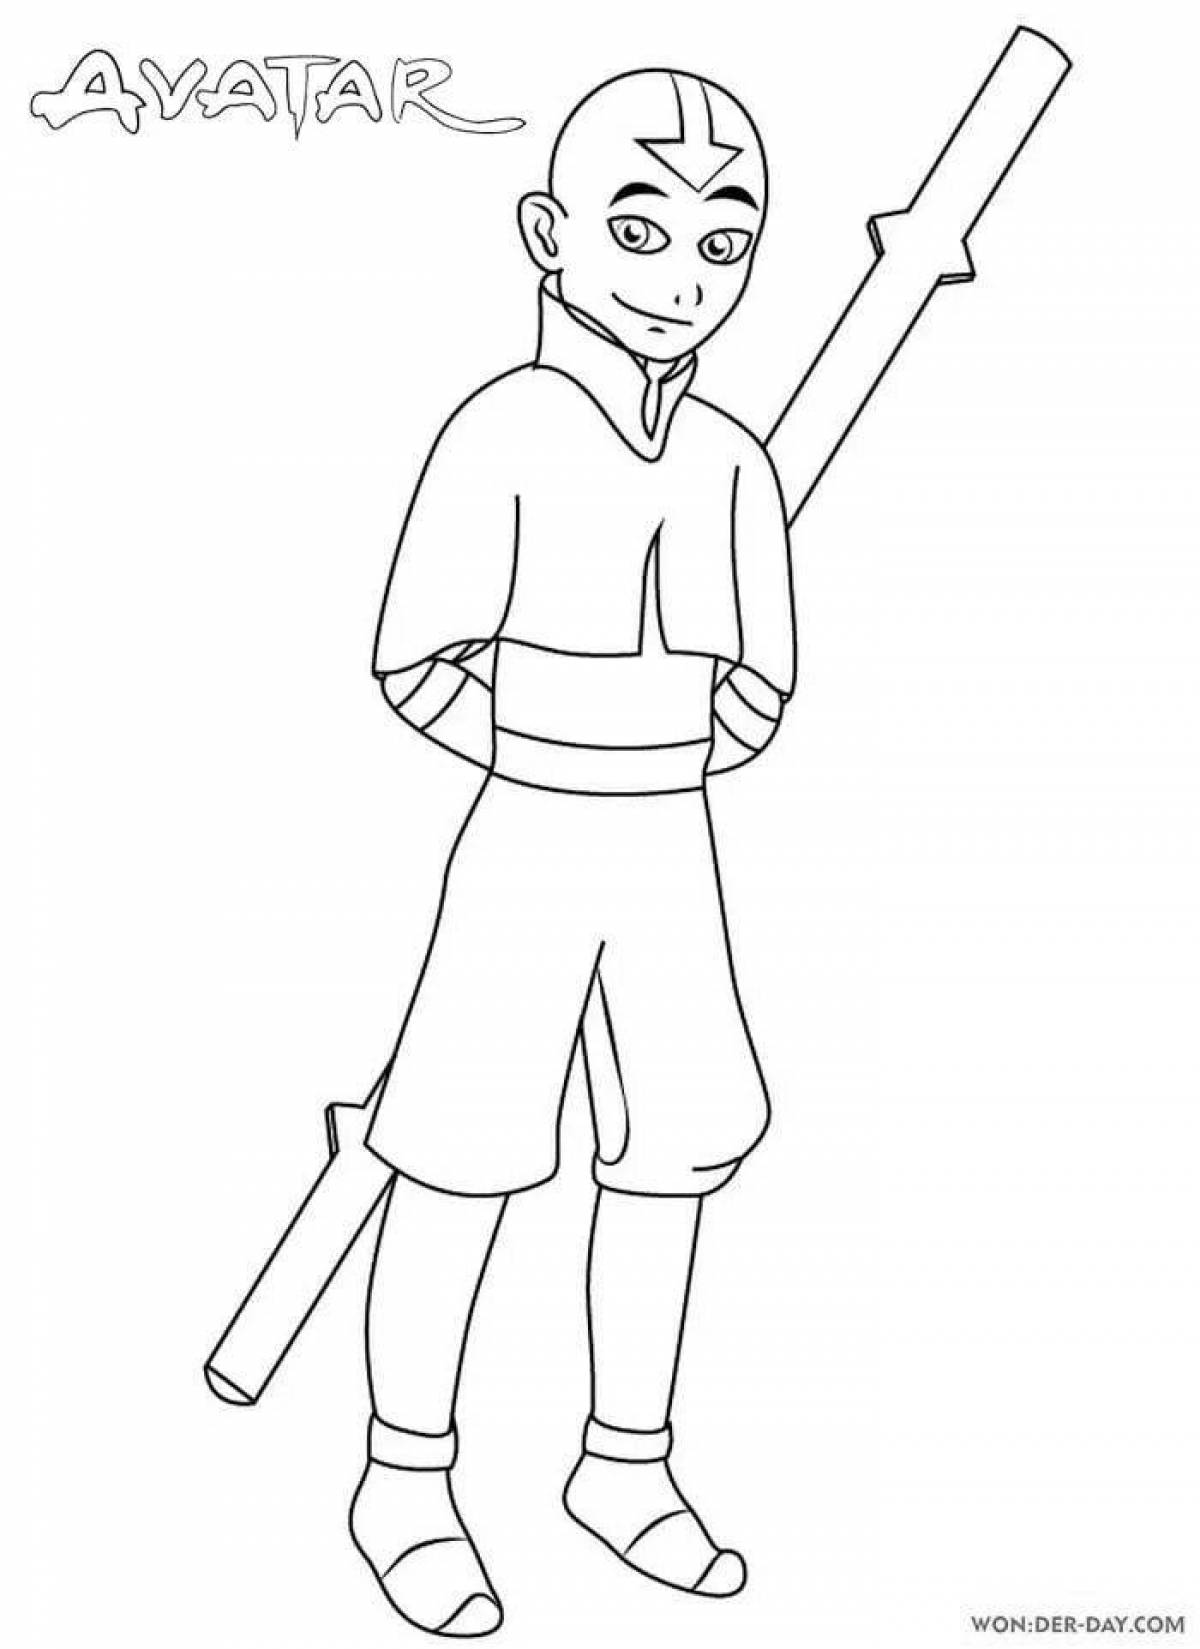 Great aang's avatar coloring page